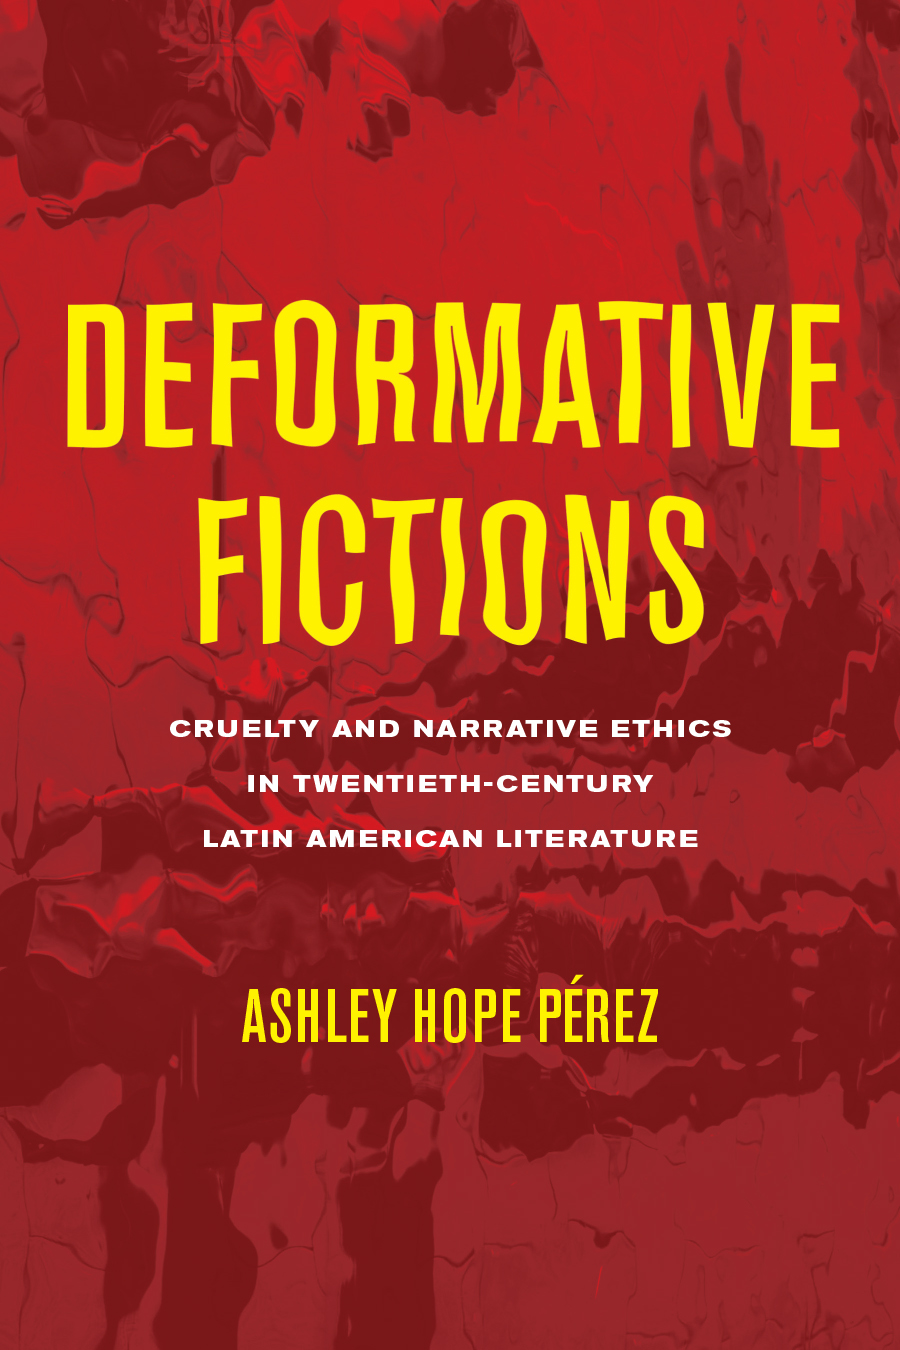 Front cover of Deformative Fictions: Cruelty and Narrative Ethics in Twentieth-Century Latin American Literature, by Ashley Hope Pérez, featuring a background or distorted shapes in various shades of red.